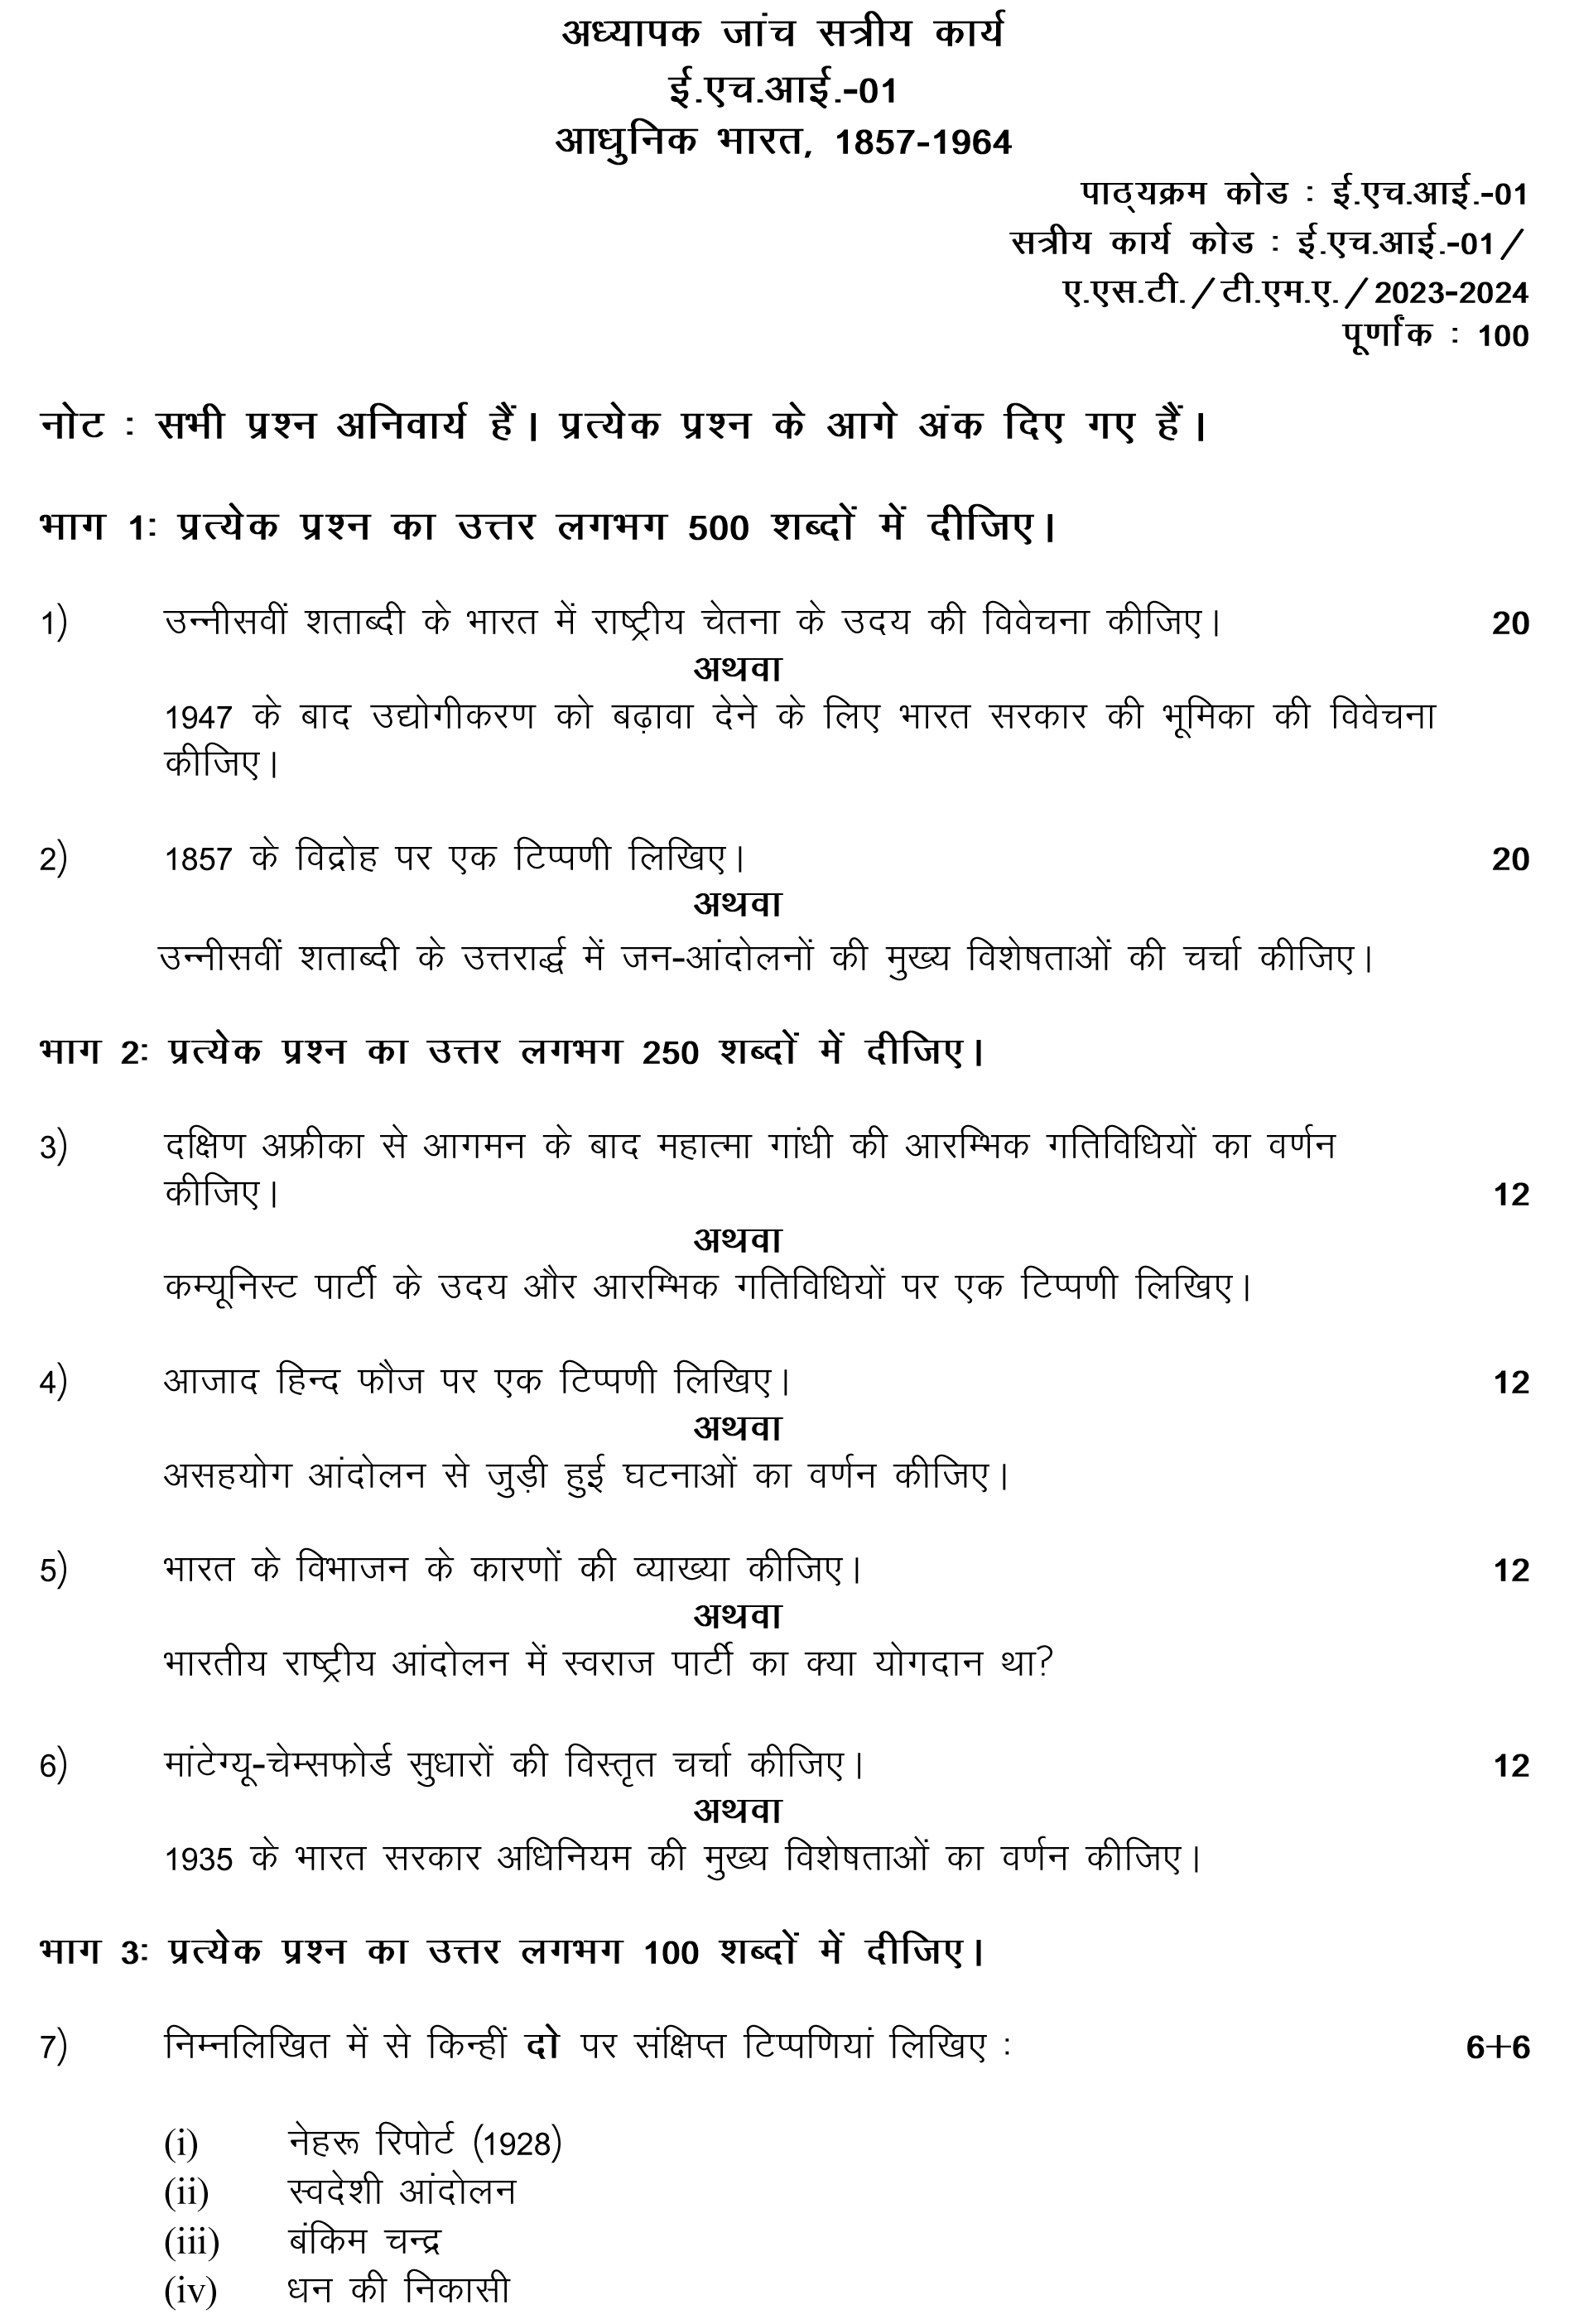 IGNOU EHI-01 - Modern India 1857-1964 Latest Solved Assignment-July 2023 - January 2024